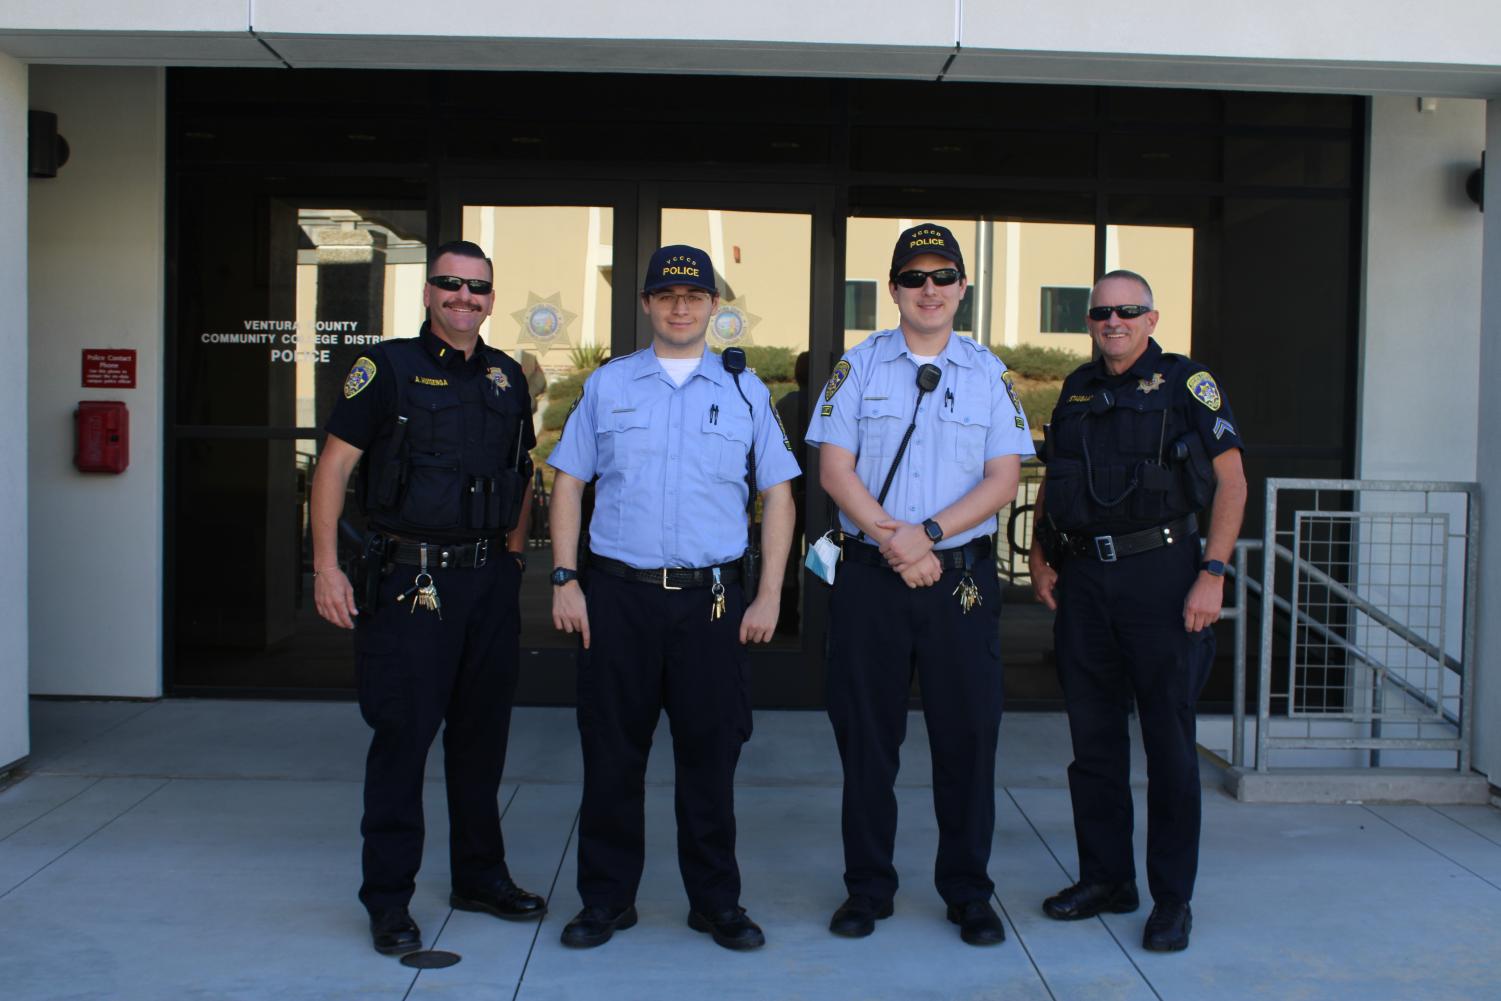 Pictured left to right, Lieutenant Andrew Huisenga, Police Cadet Maxwell Kearney, Police Cadet Matthew Burciaga, and Officer John Staugaard pose for a picture in front of Moorpark College Campus Safety Police Station on Nov. 15.